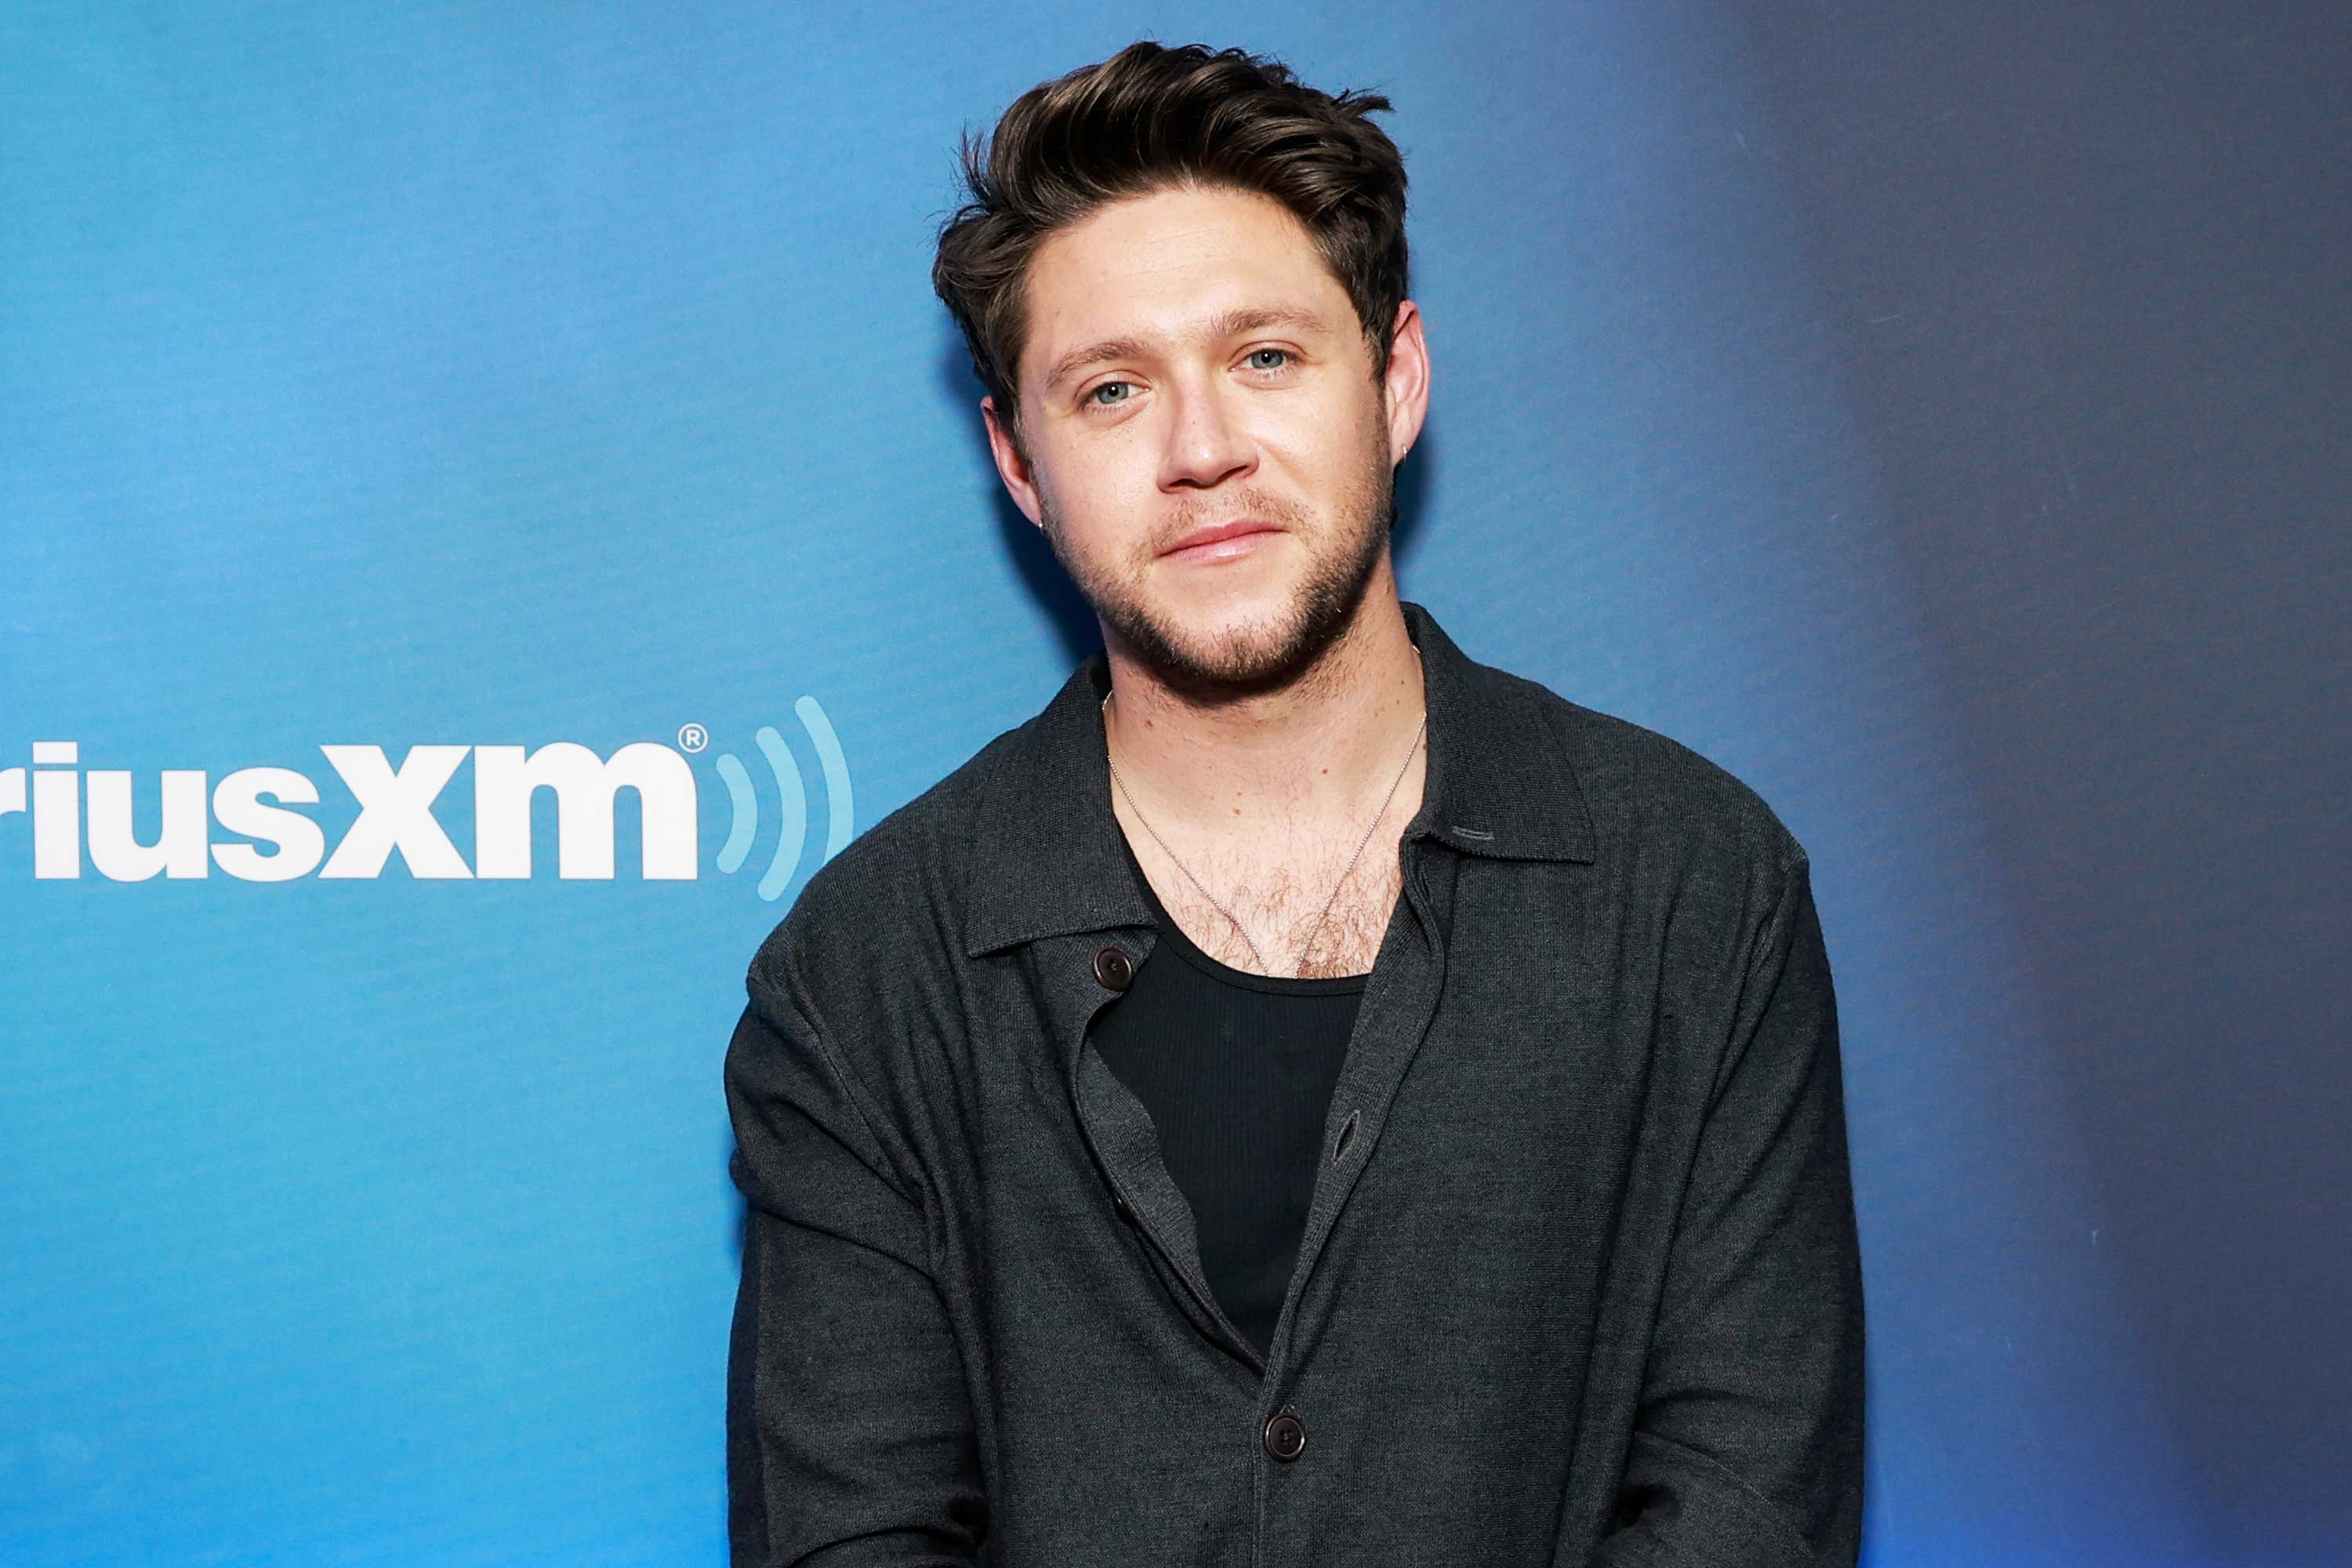 Which One Direction Songs Did Niall Horan Write?